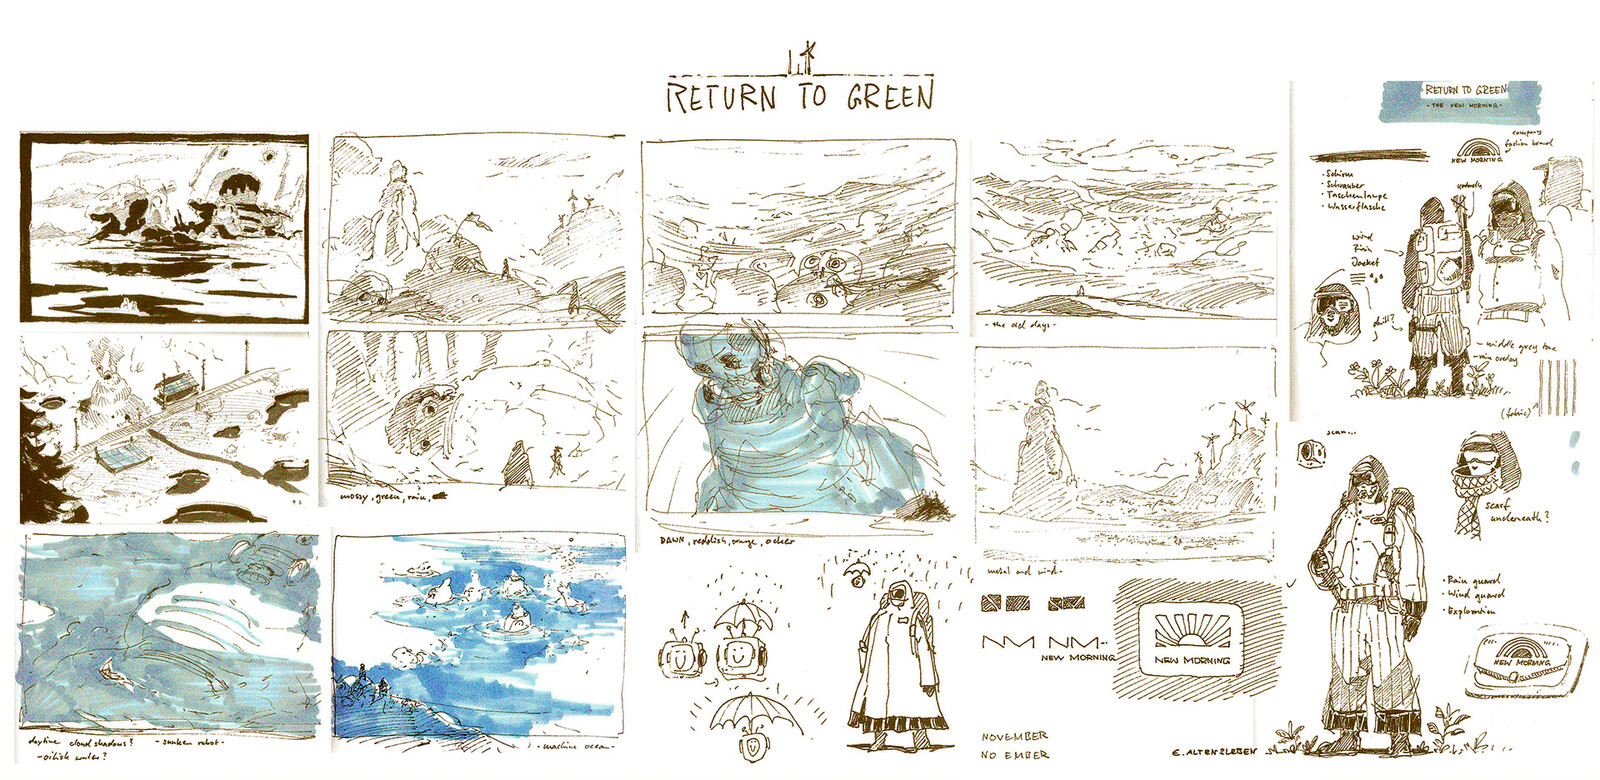 RETURN TO GREEN - initial sketches